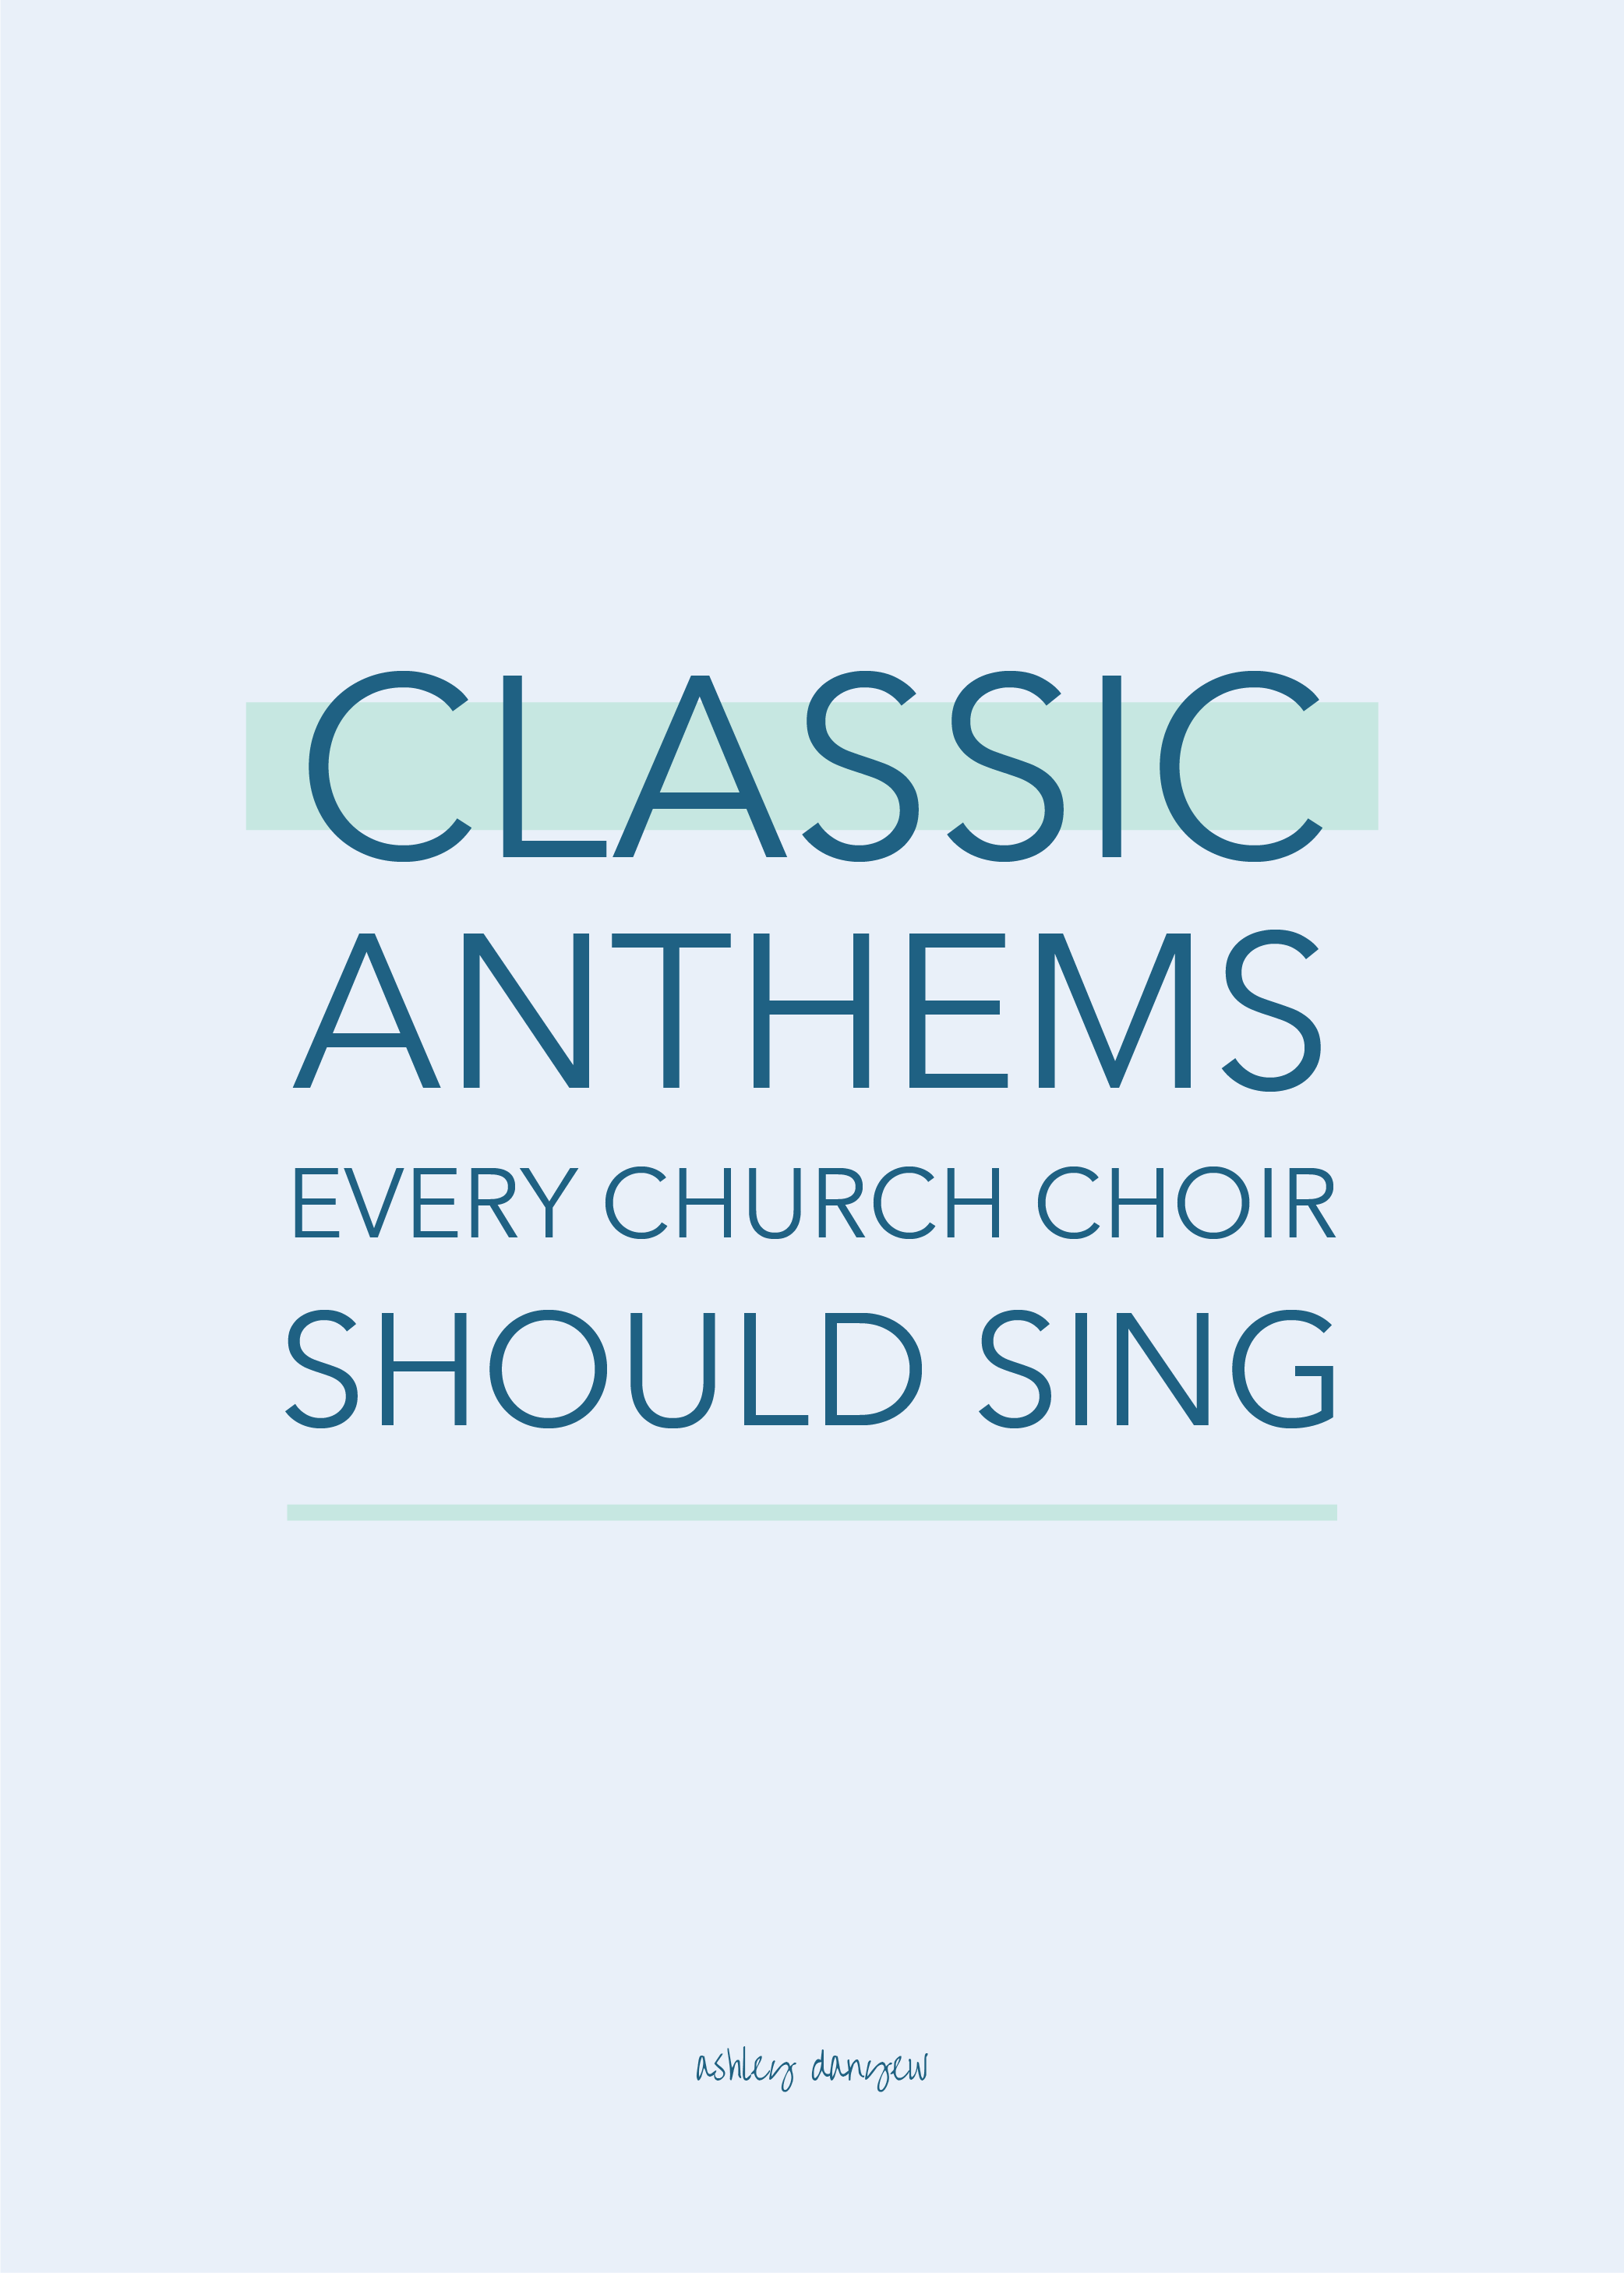 Classic Anthems Every Church Choir Should Sing